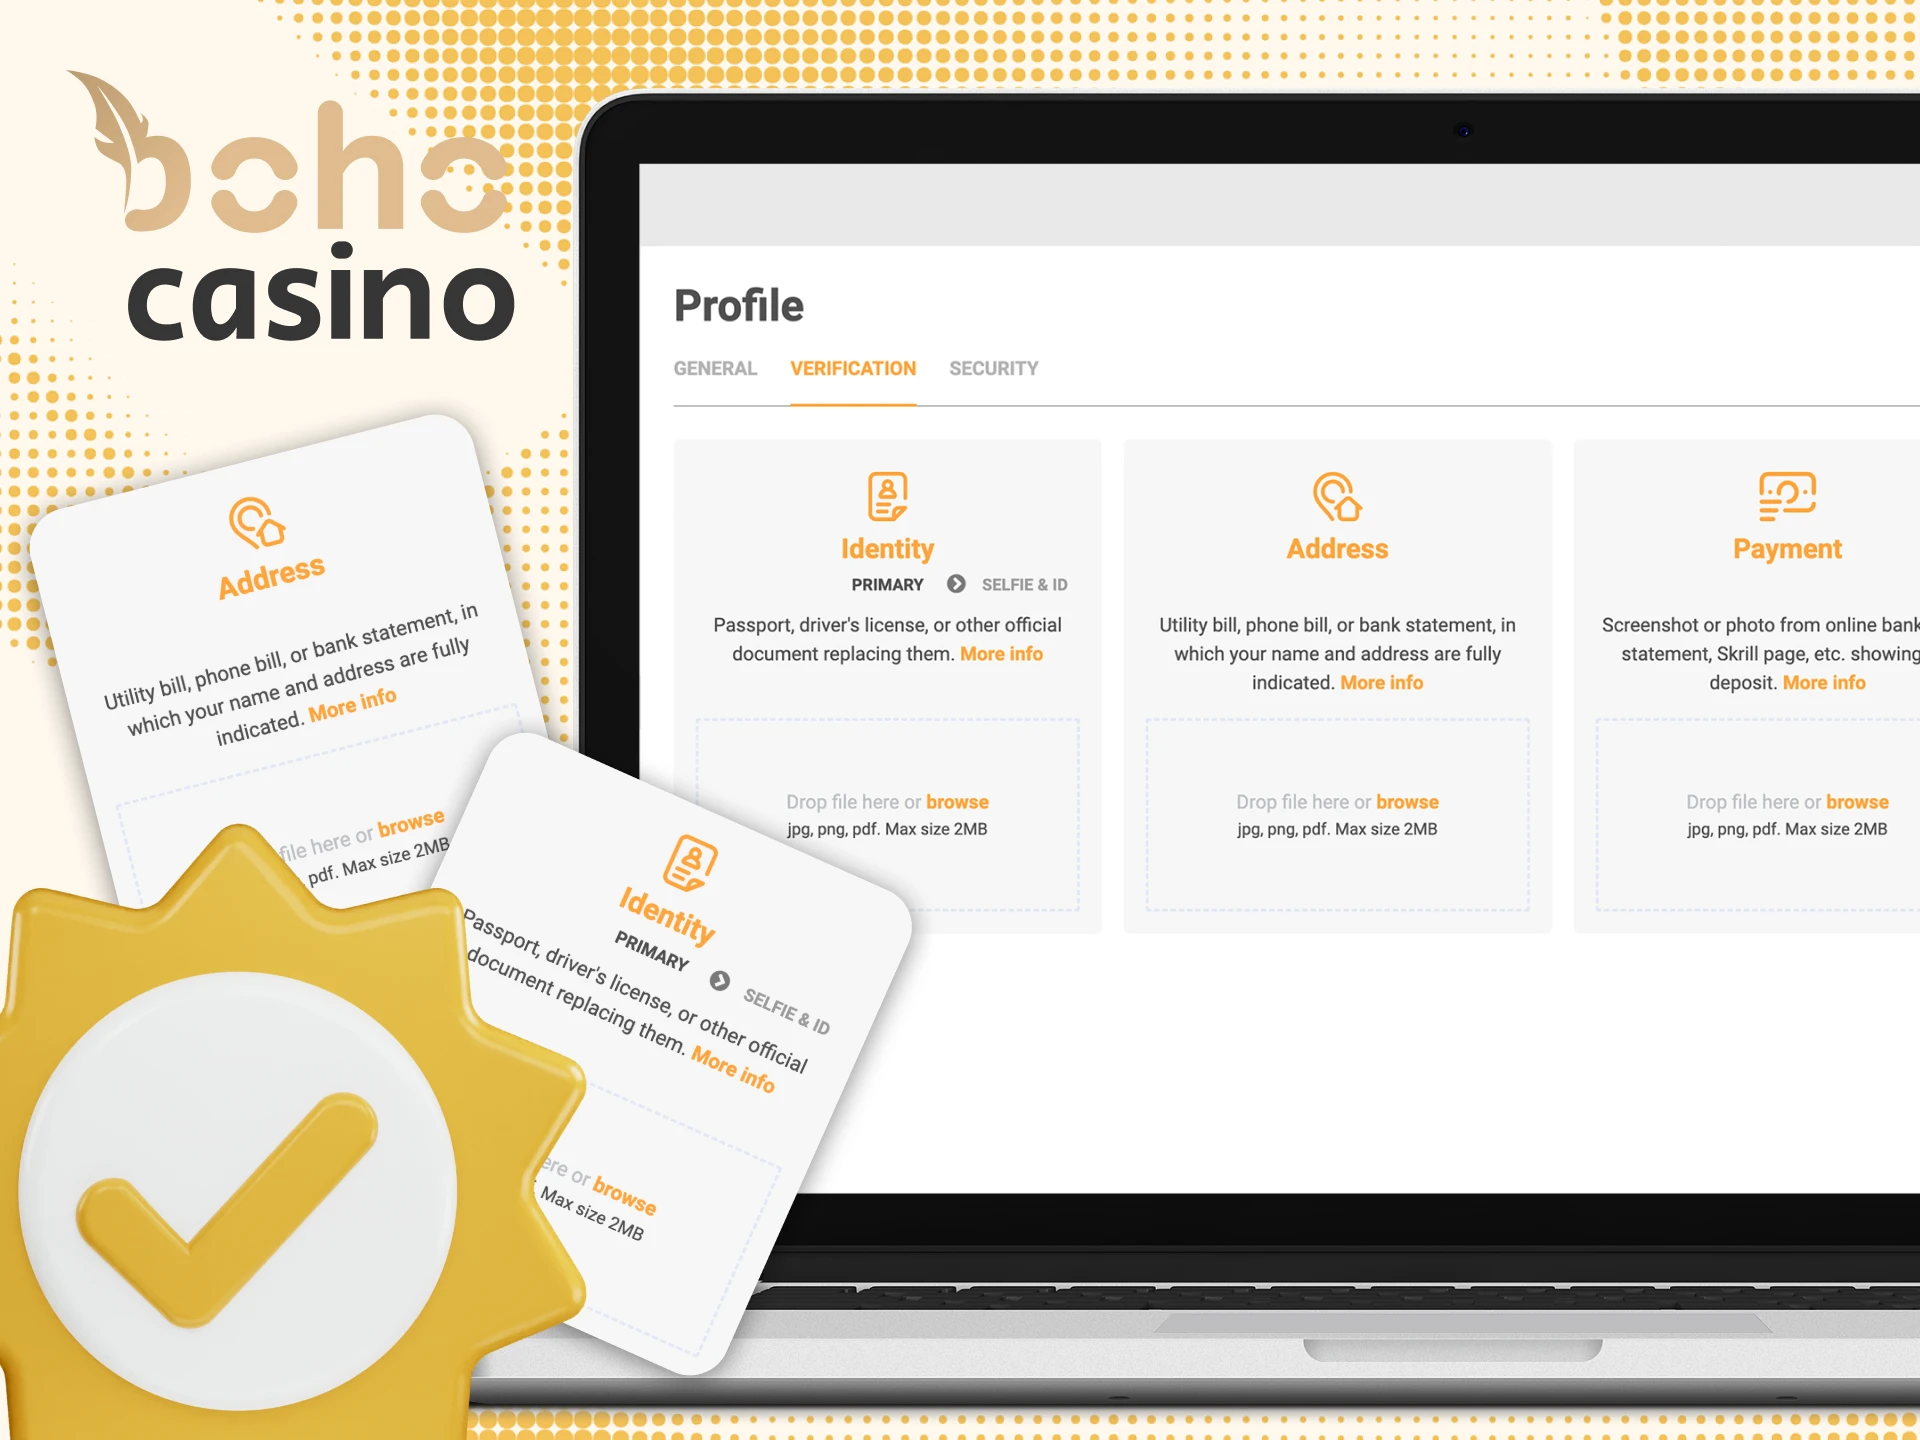 Instructions on how to verify your account on the Boho online casino website.